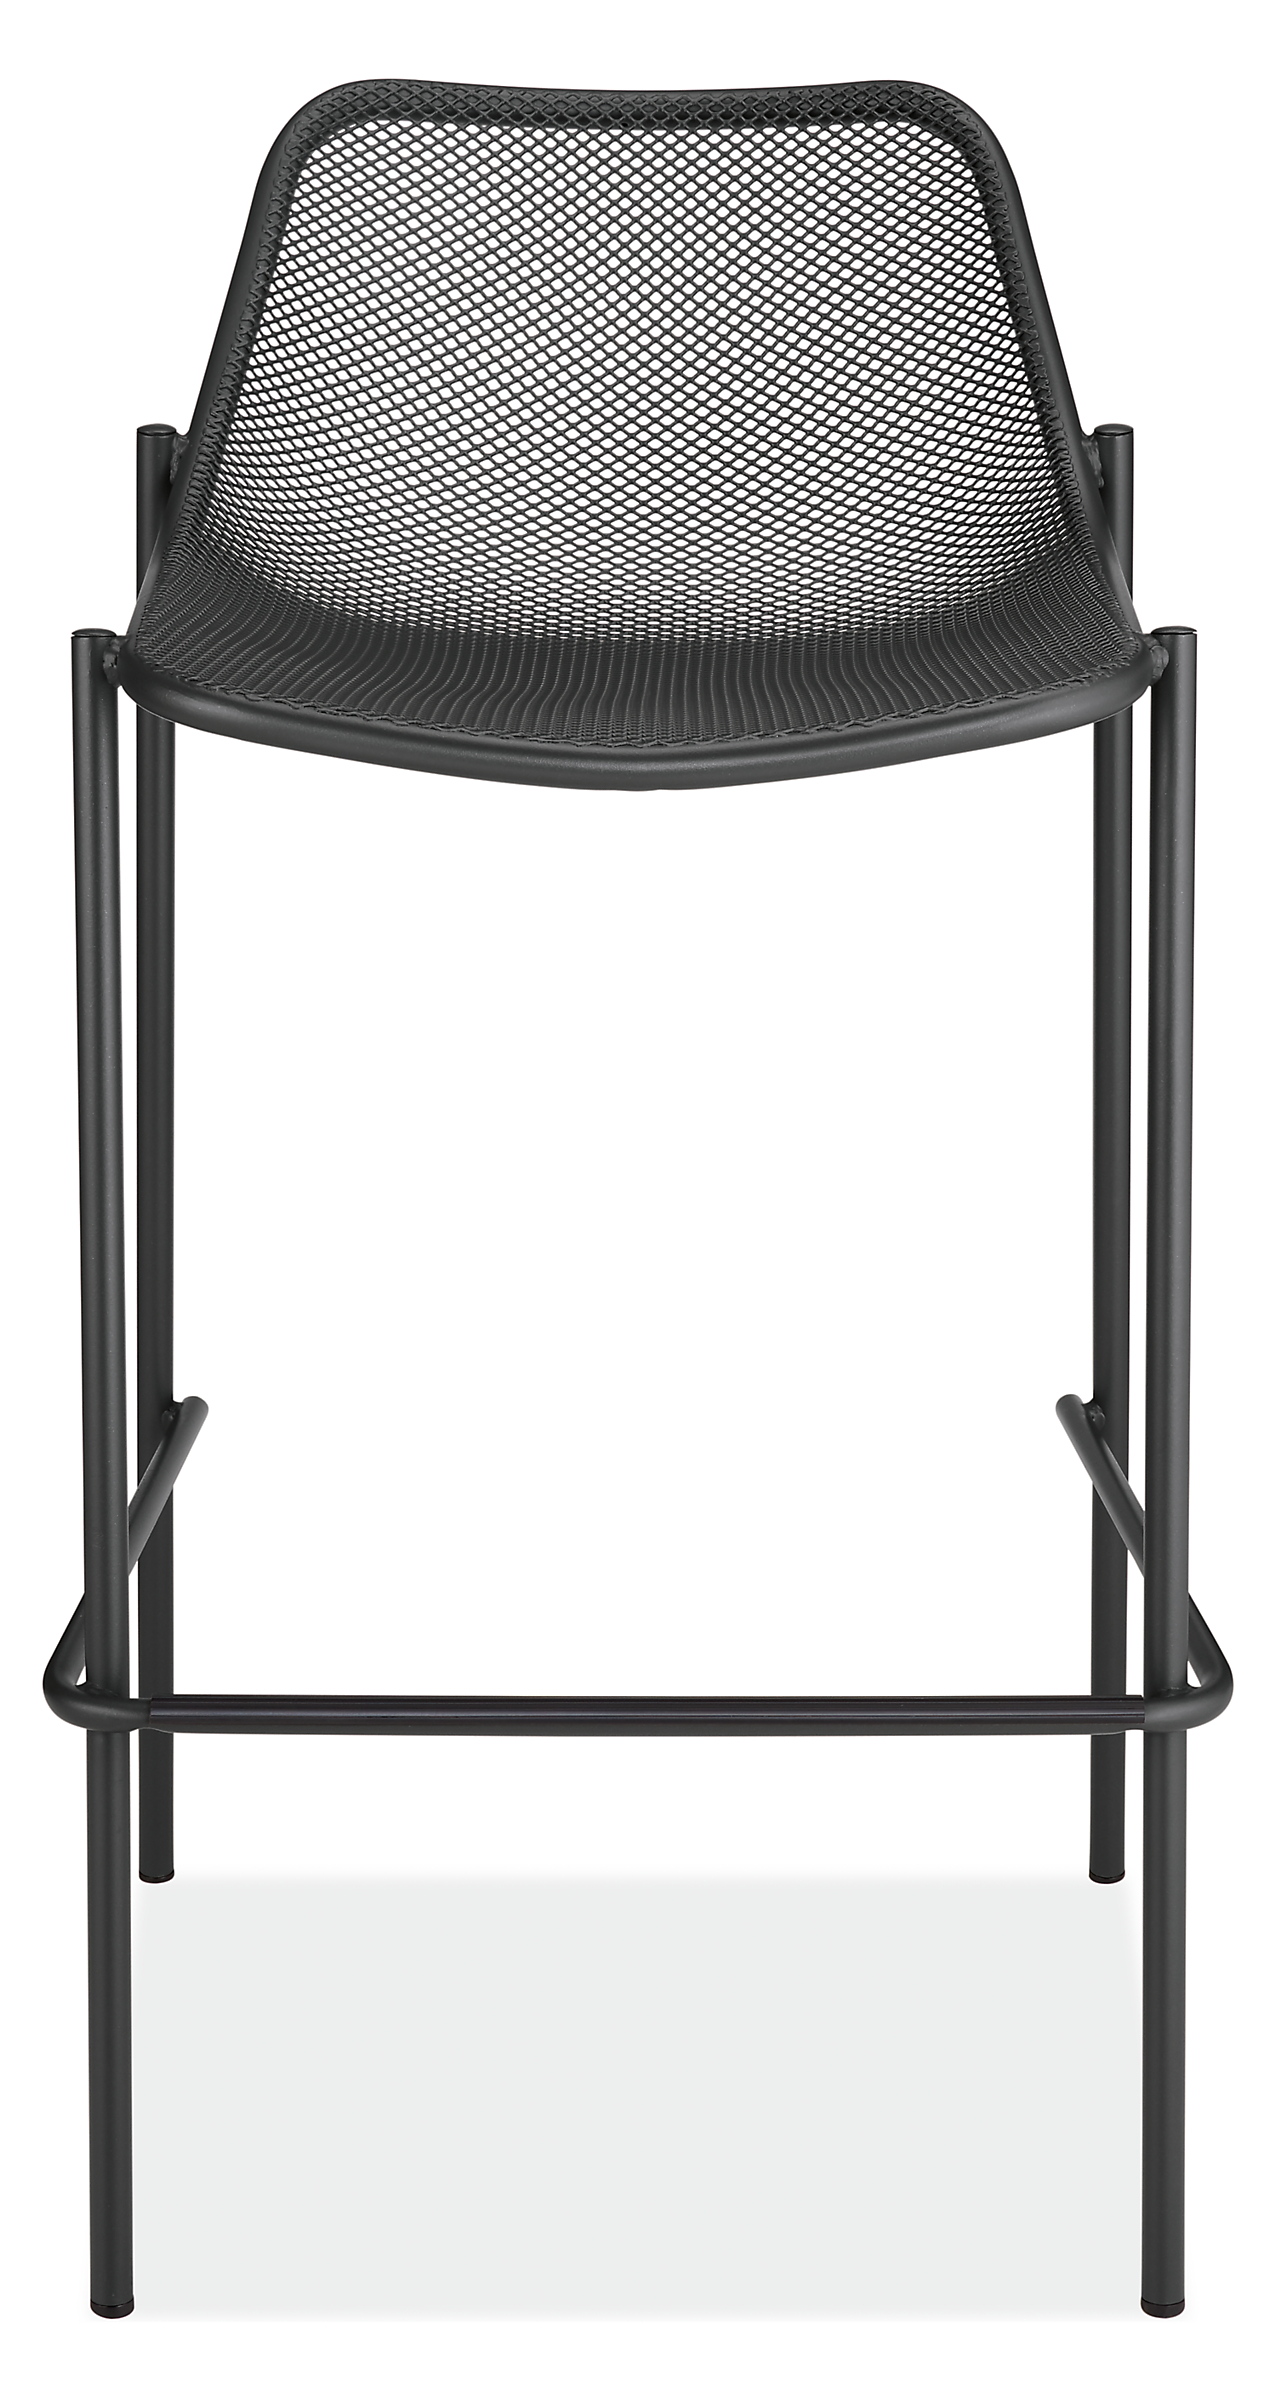 Front view of Soleil Bar Stool in Graphite.